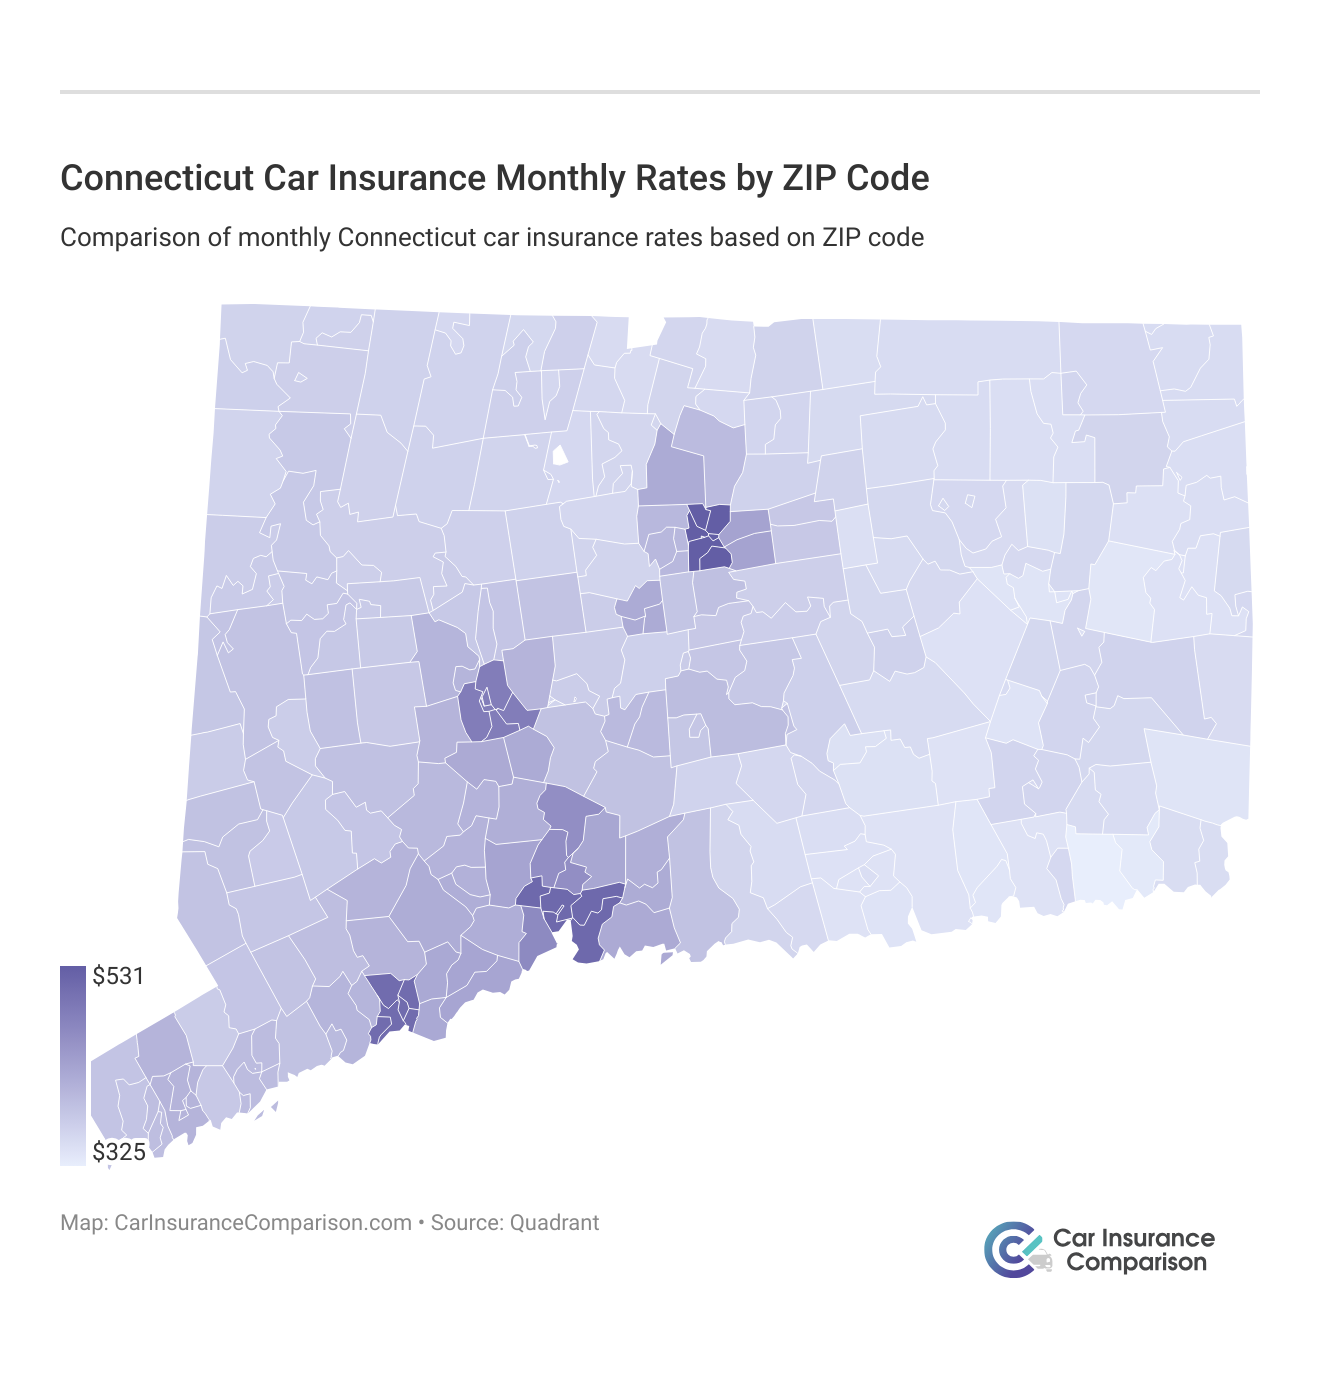 <h3>Connecticut Car Insurance Monthly Rates by ZIP Code</h3>